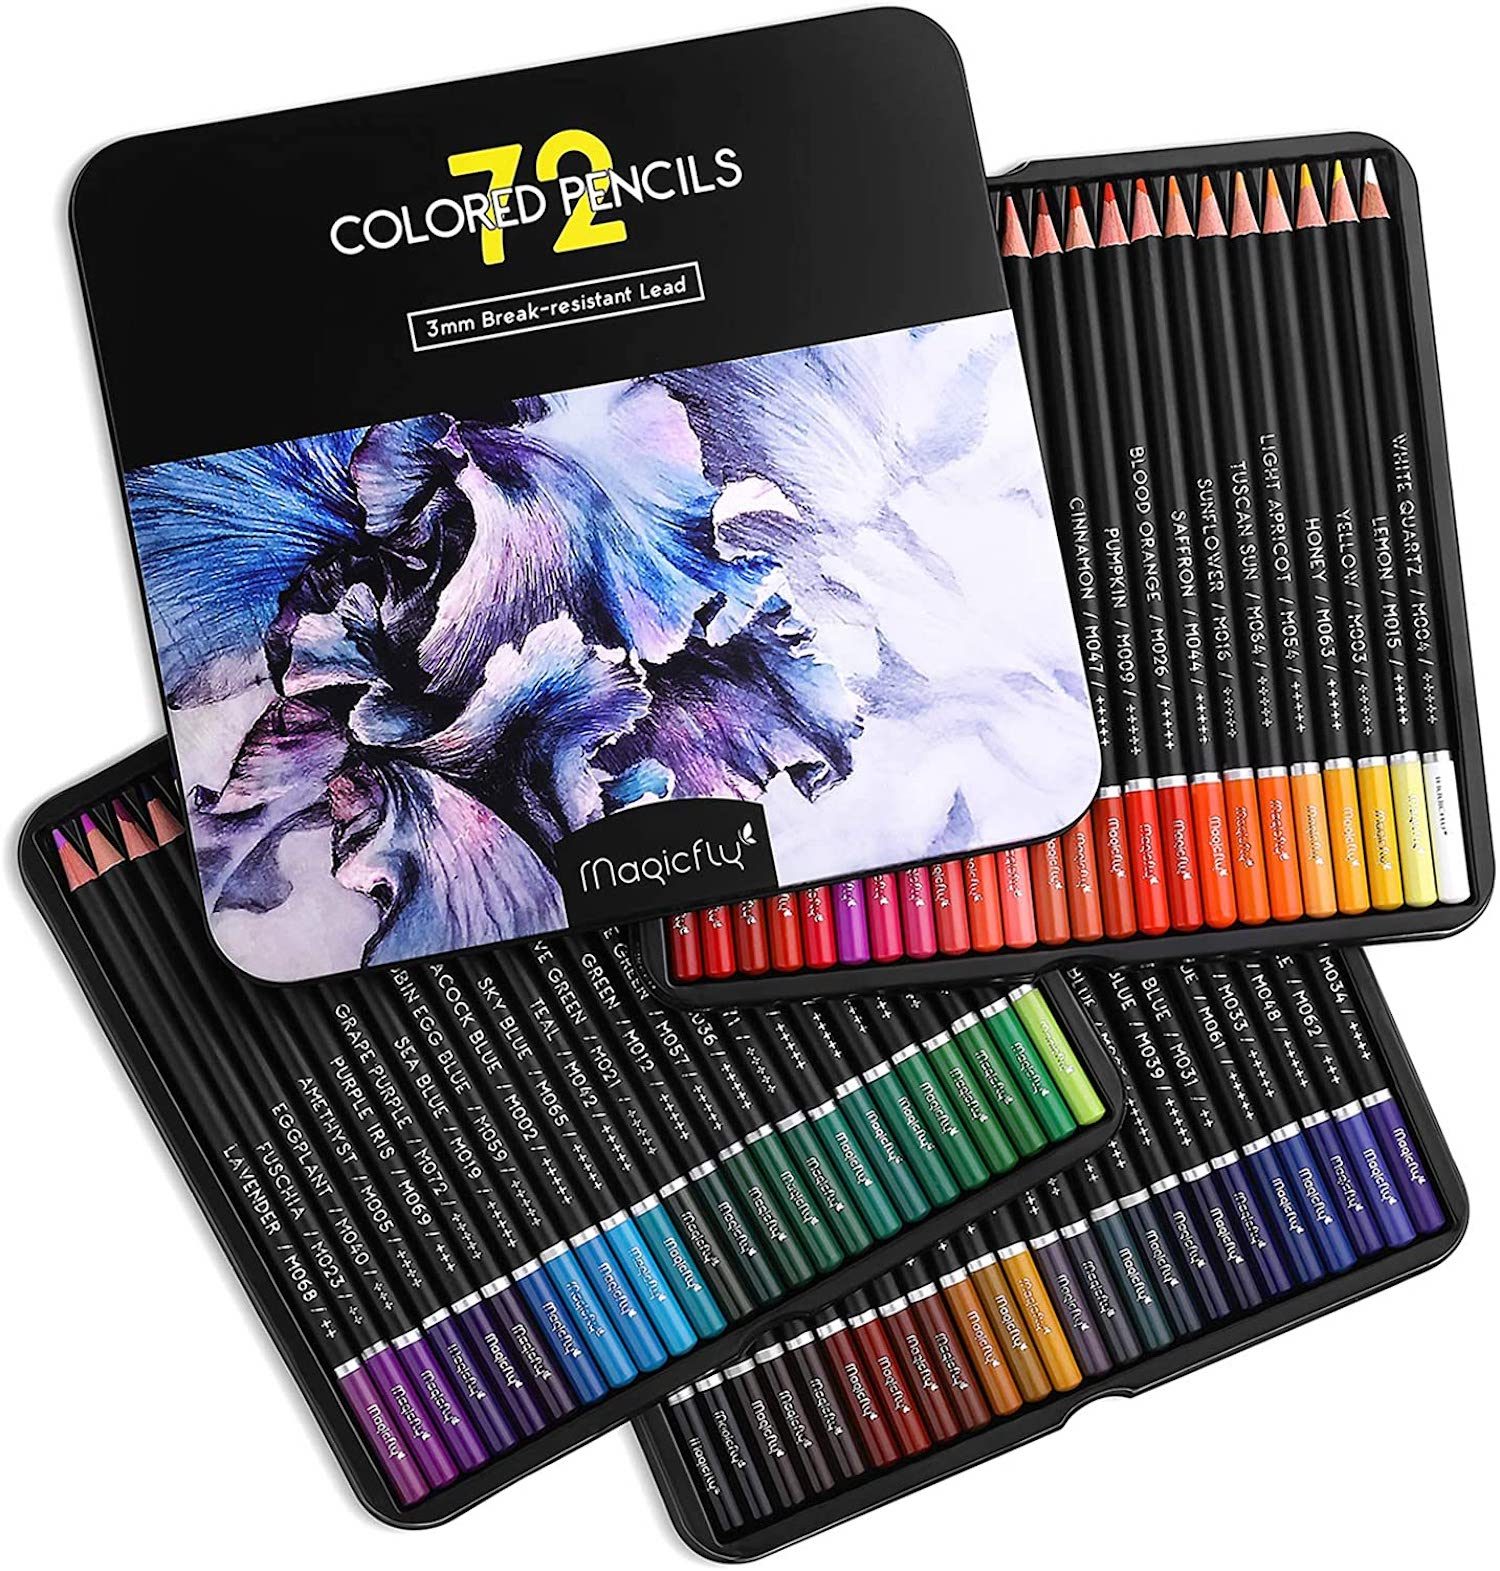 The 6 Best Coloring Pencils for Artists in 2023 (October) – Artlex